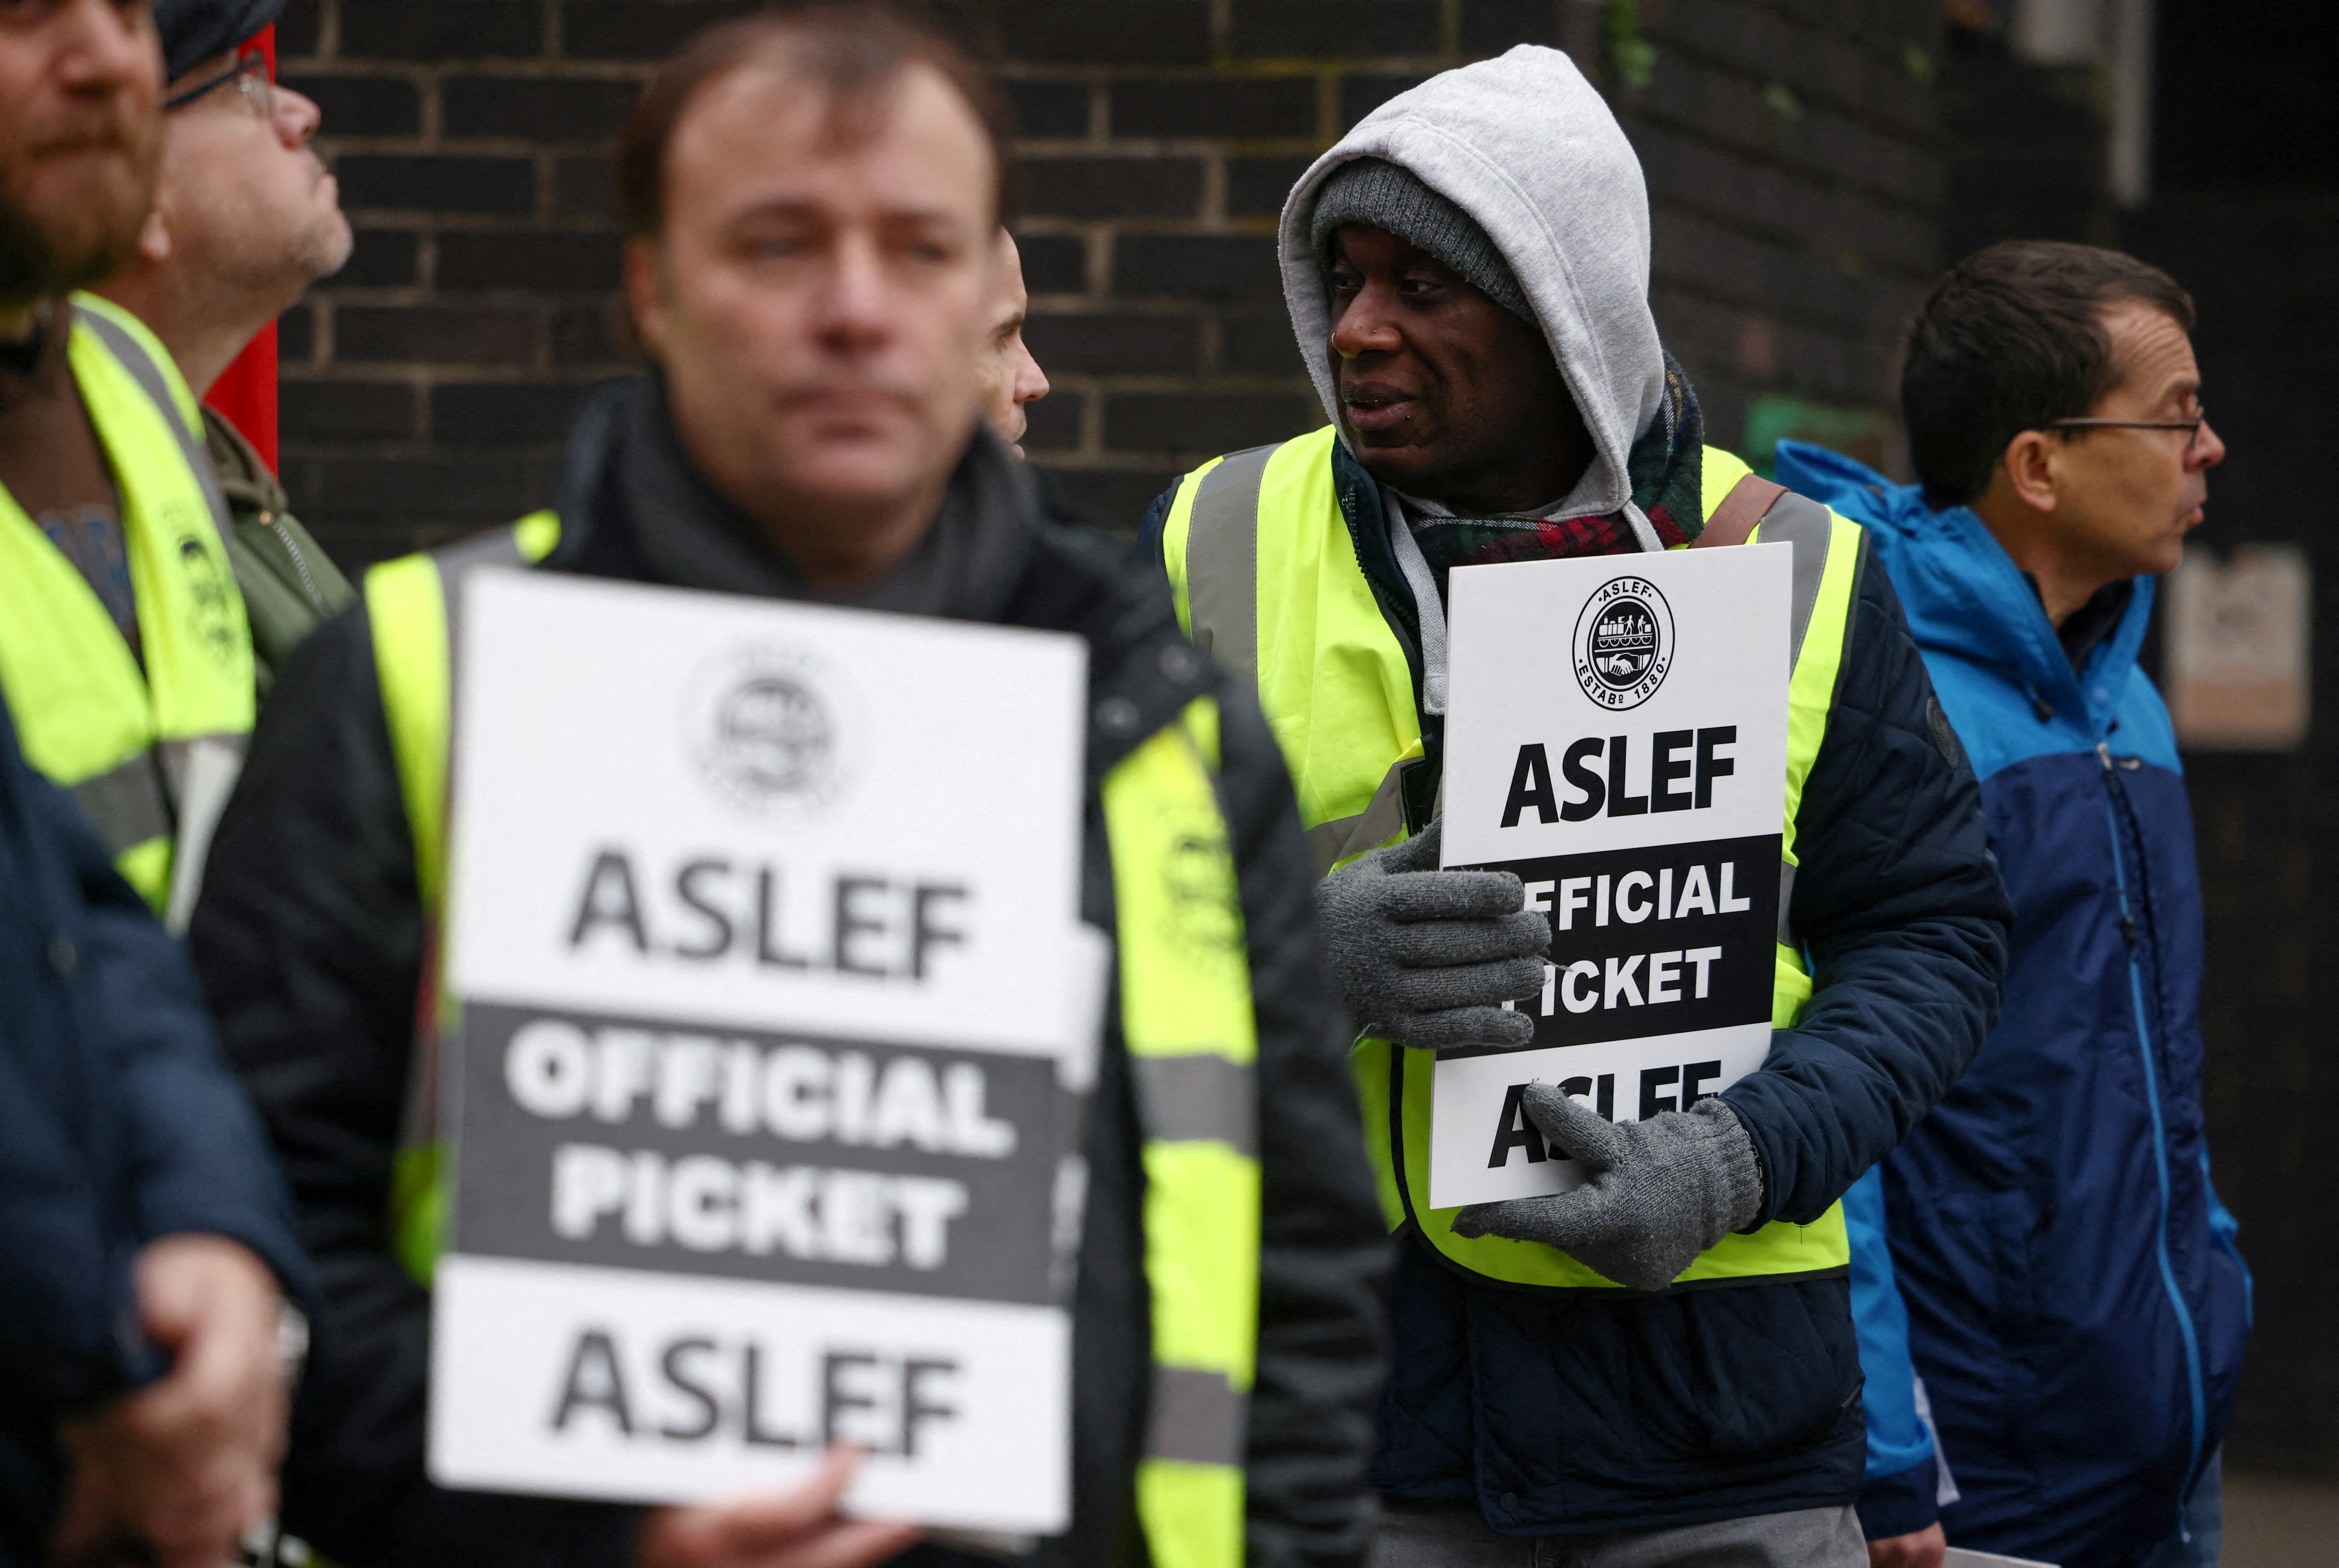 image More train strikes in the UK as drivers reject latest offer